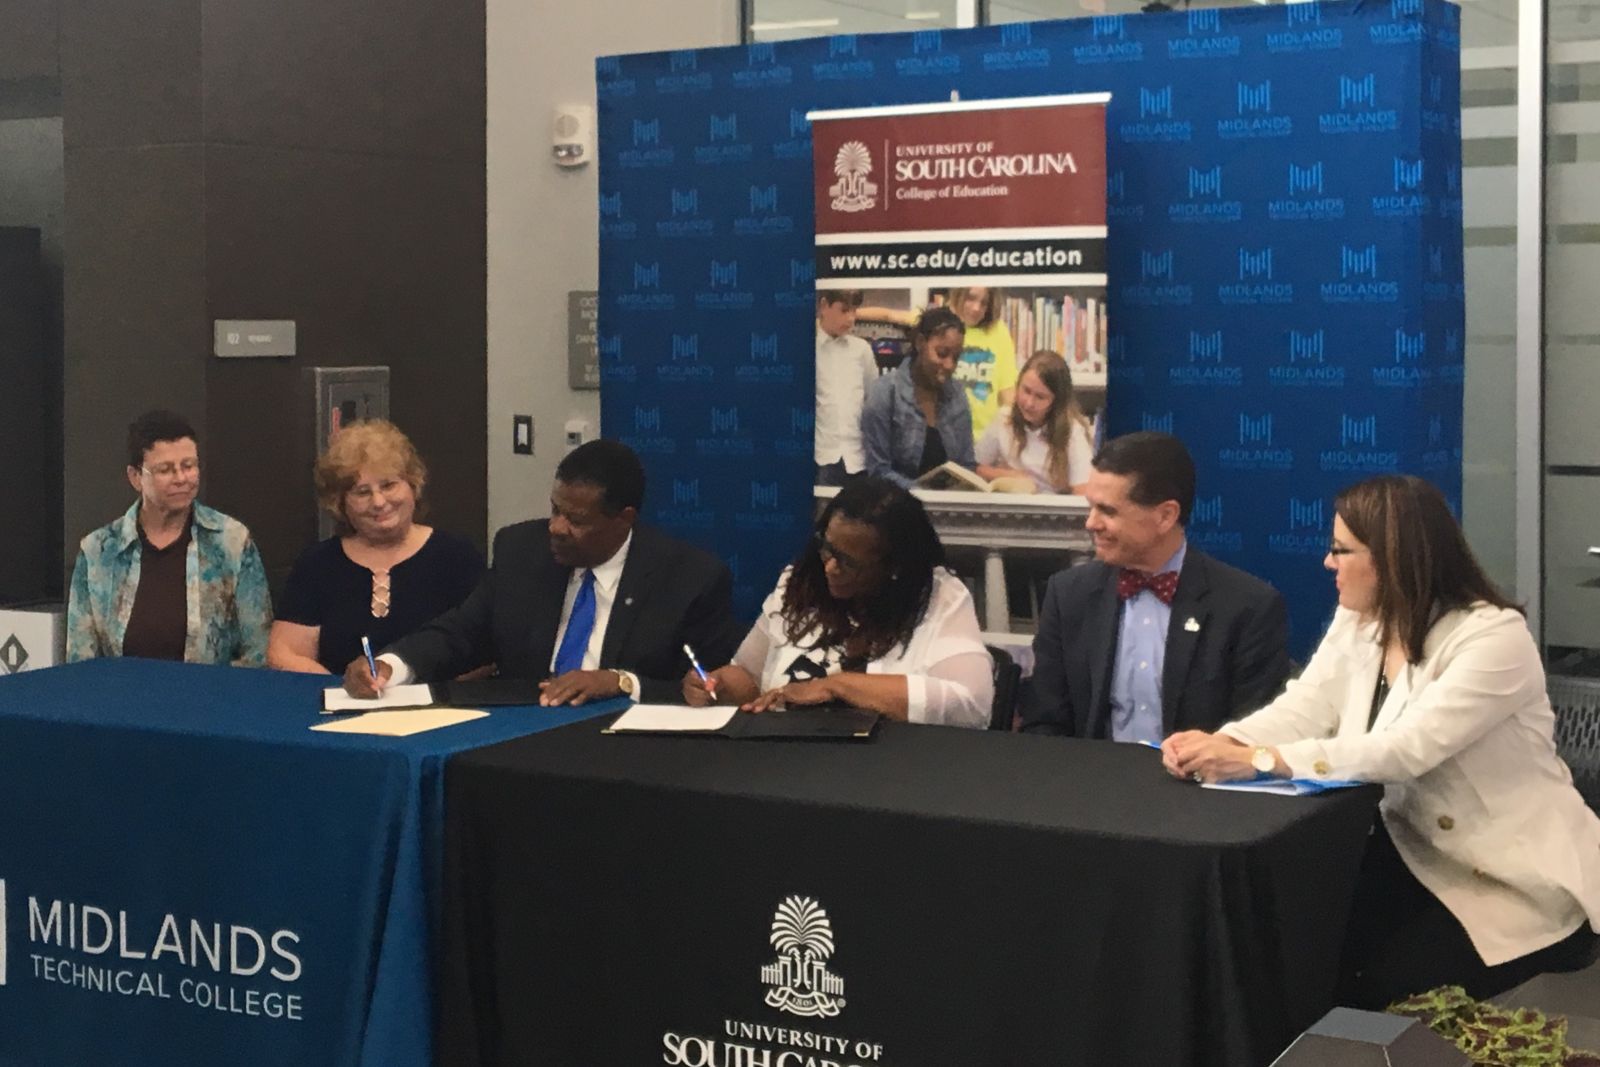 Officials from the University of South Carolina and Midlands Technical College, including MTC president Ron Rhames (third from left), sign an agreement to streamline the transfer process for MTC graduates looking to pursue an education degree at USC. (Photo/Melinda Waldrop)